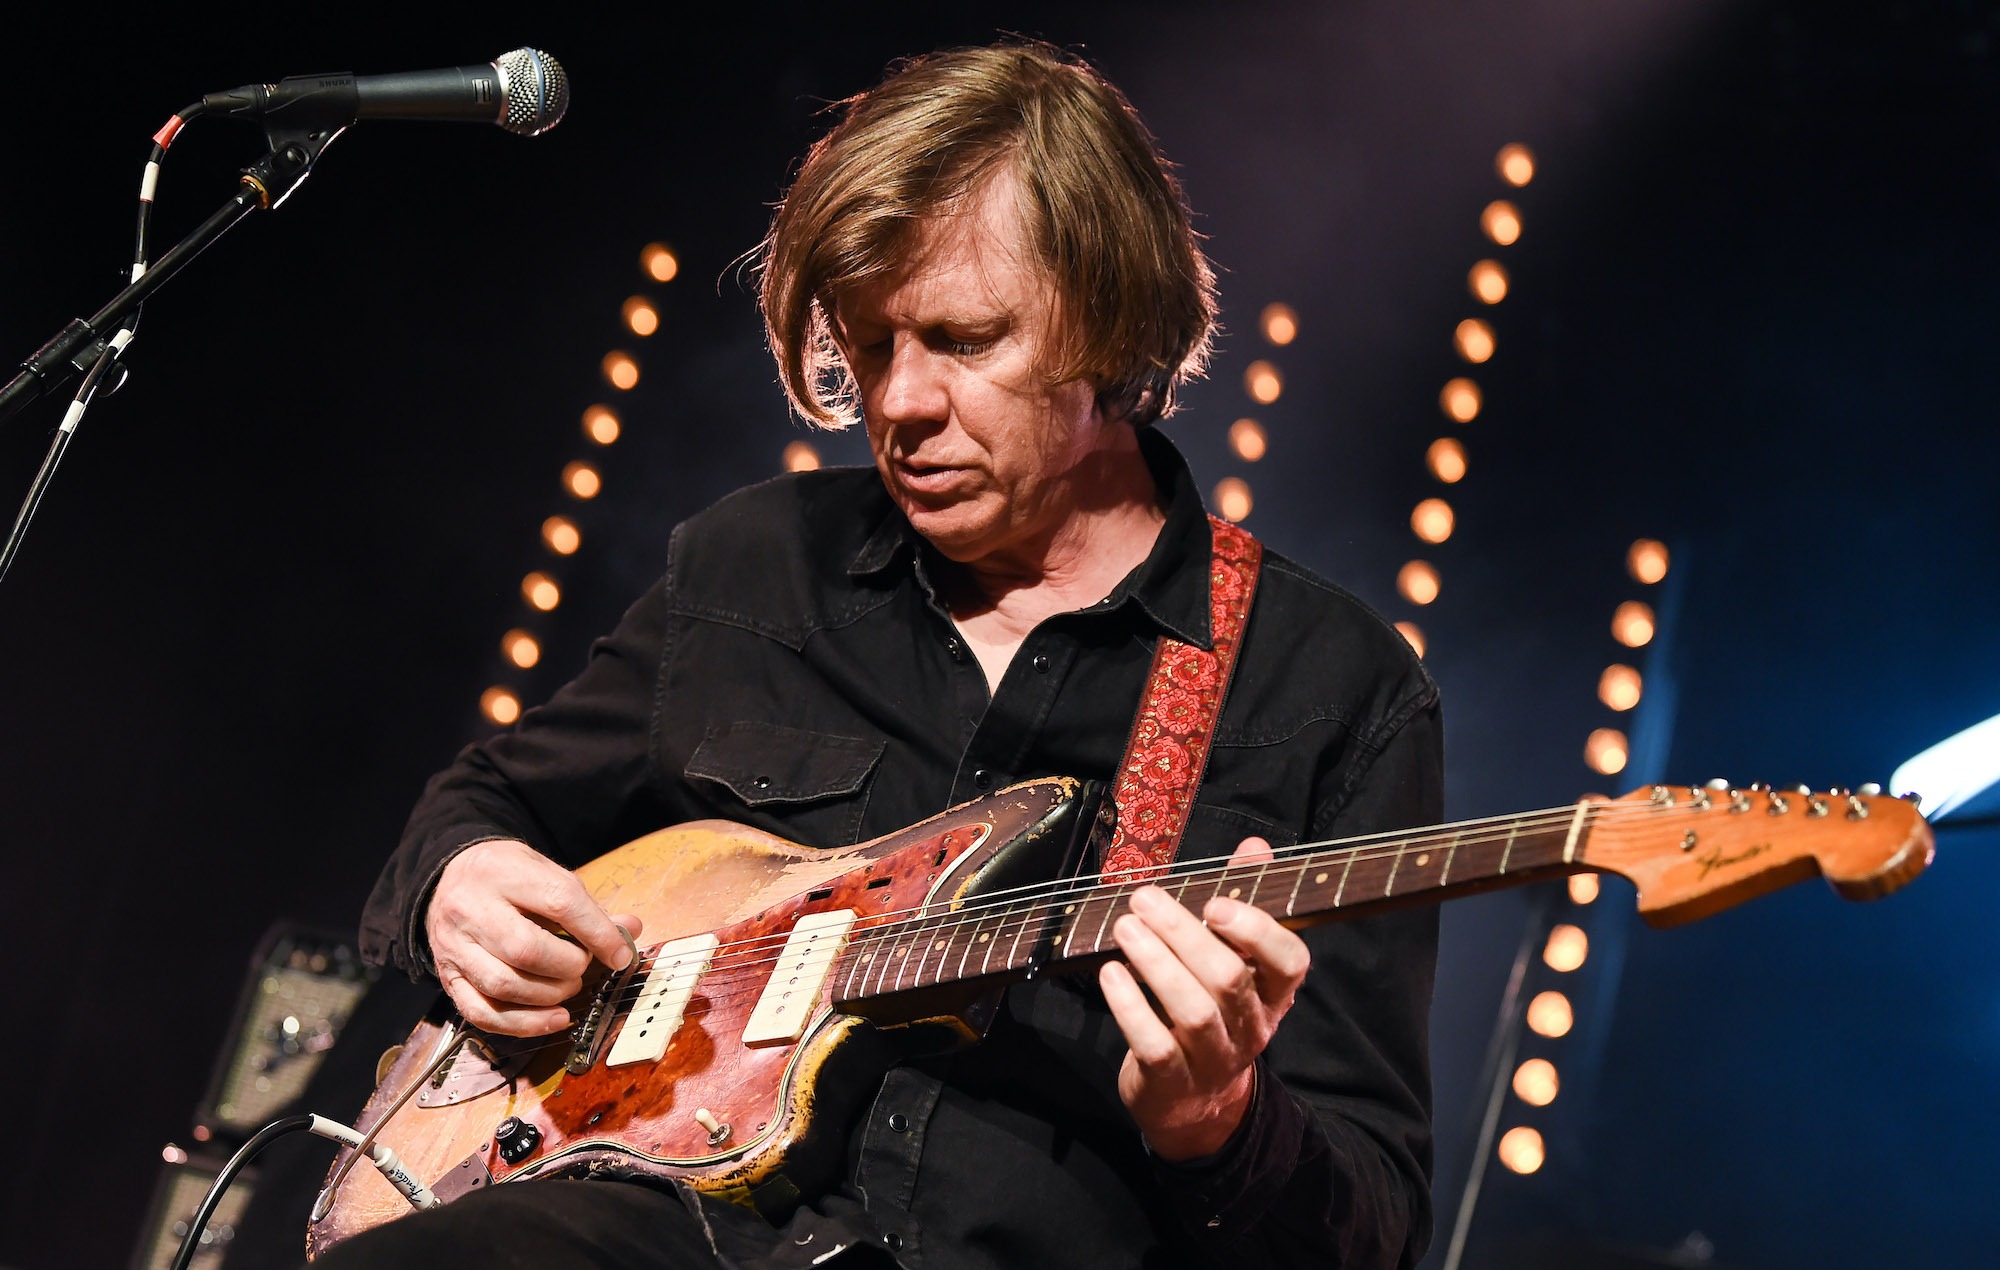 Thurston Moore on “killer” new music and the “high order nihilism” of Boris Johnson and Donald Trump